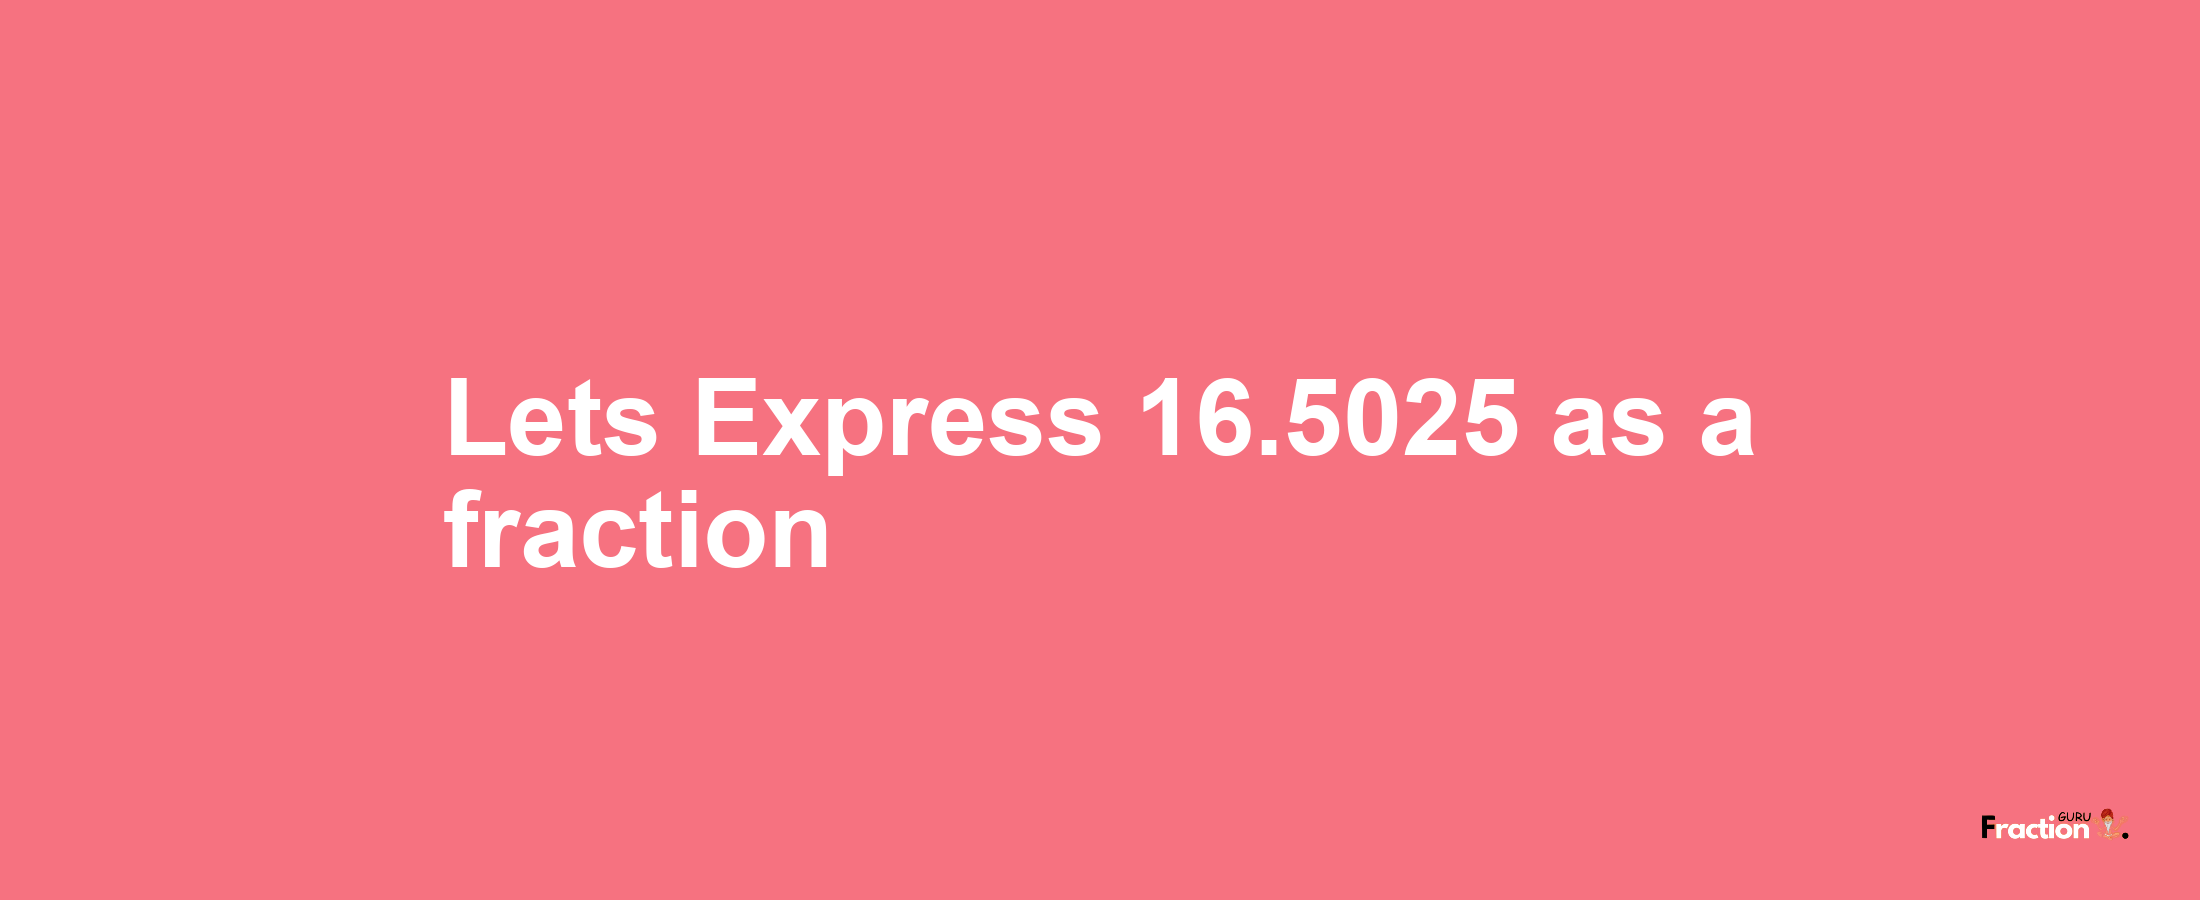 Lets Express 16.5025 as afraction